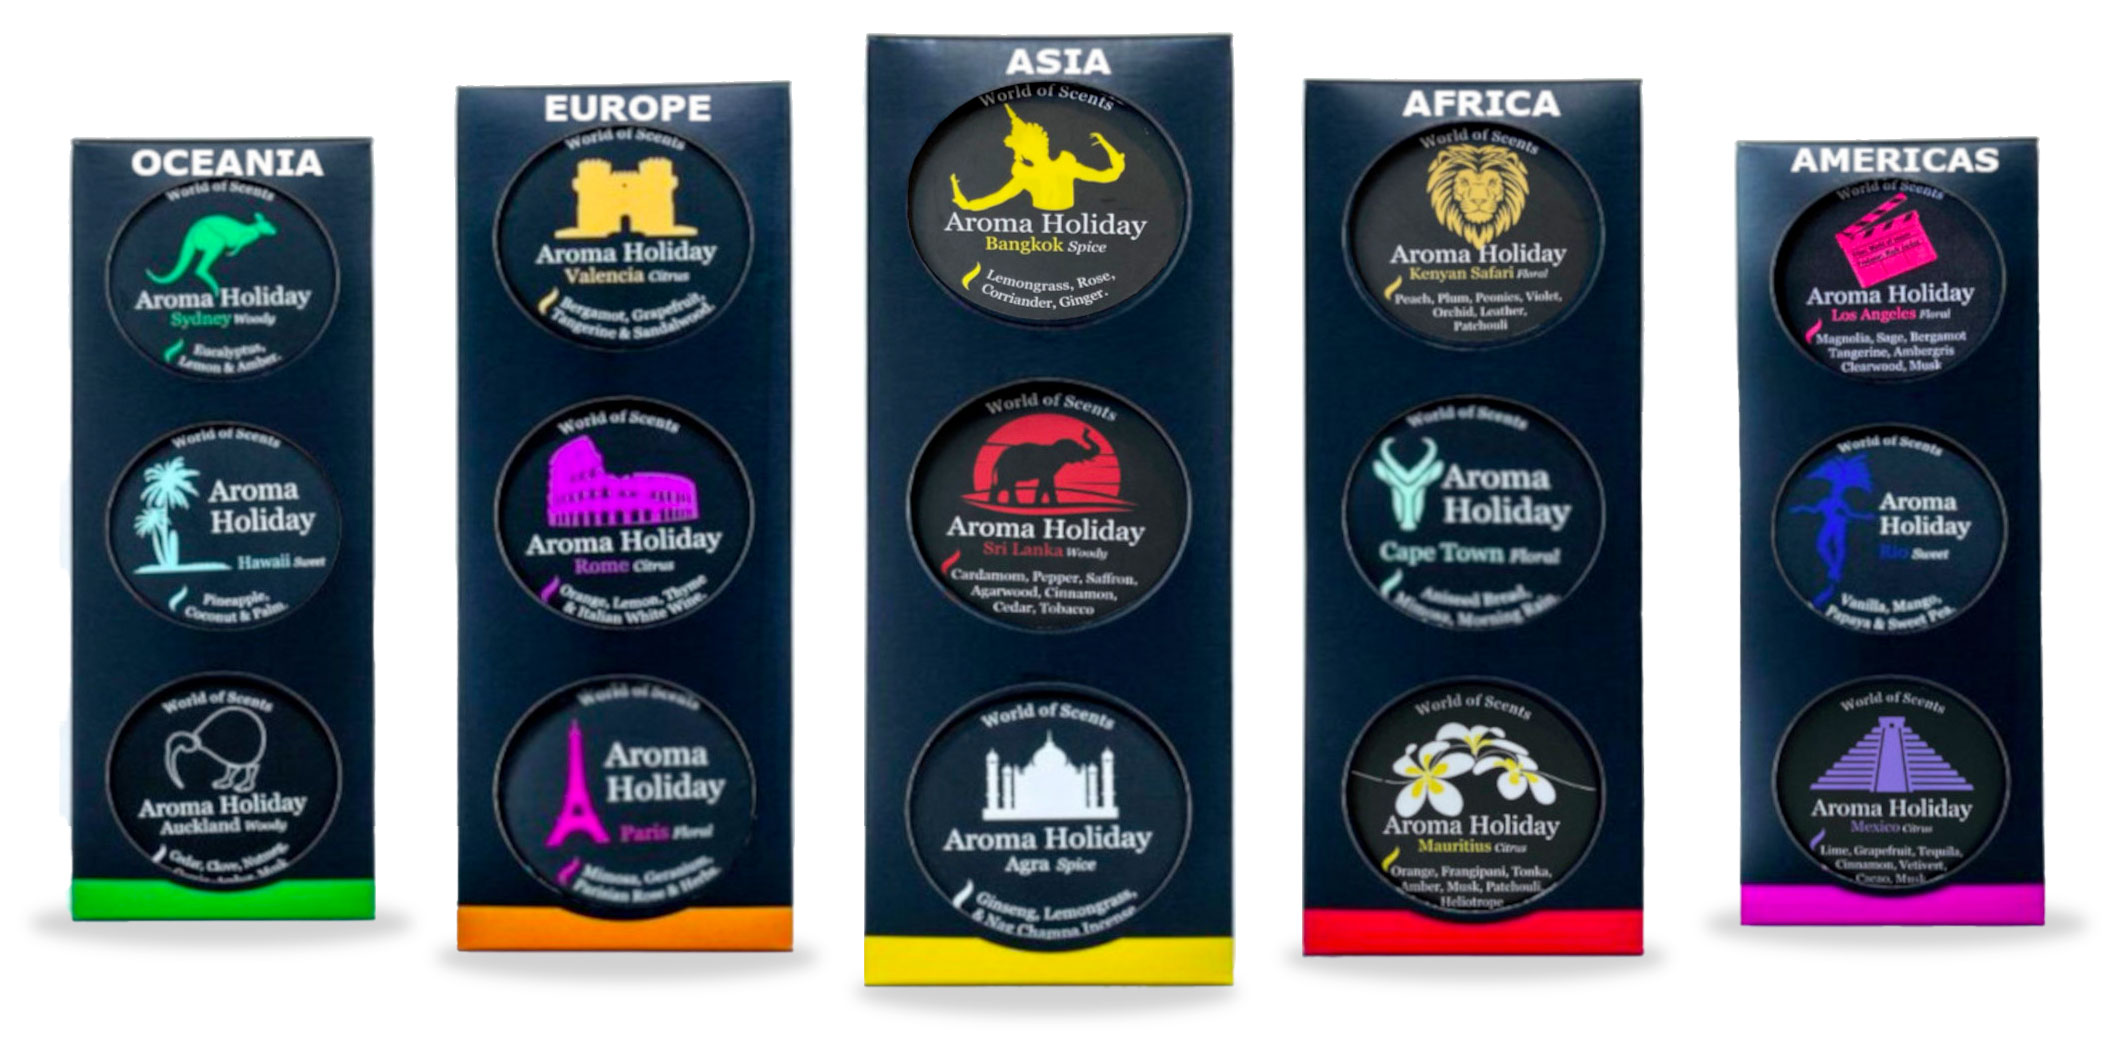 holiday candles of World Travel Retail